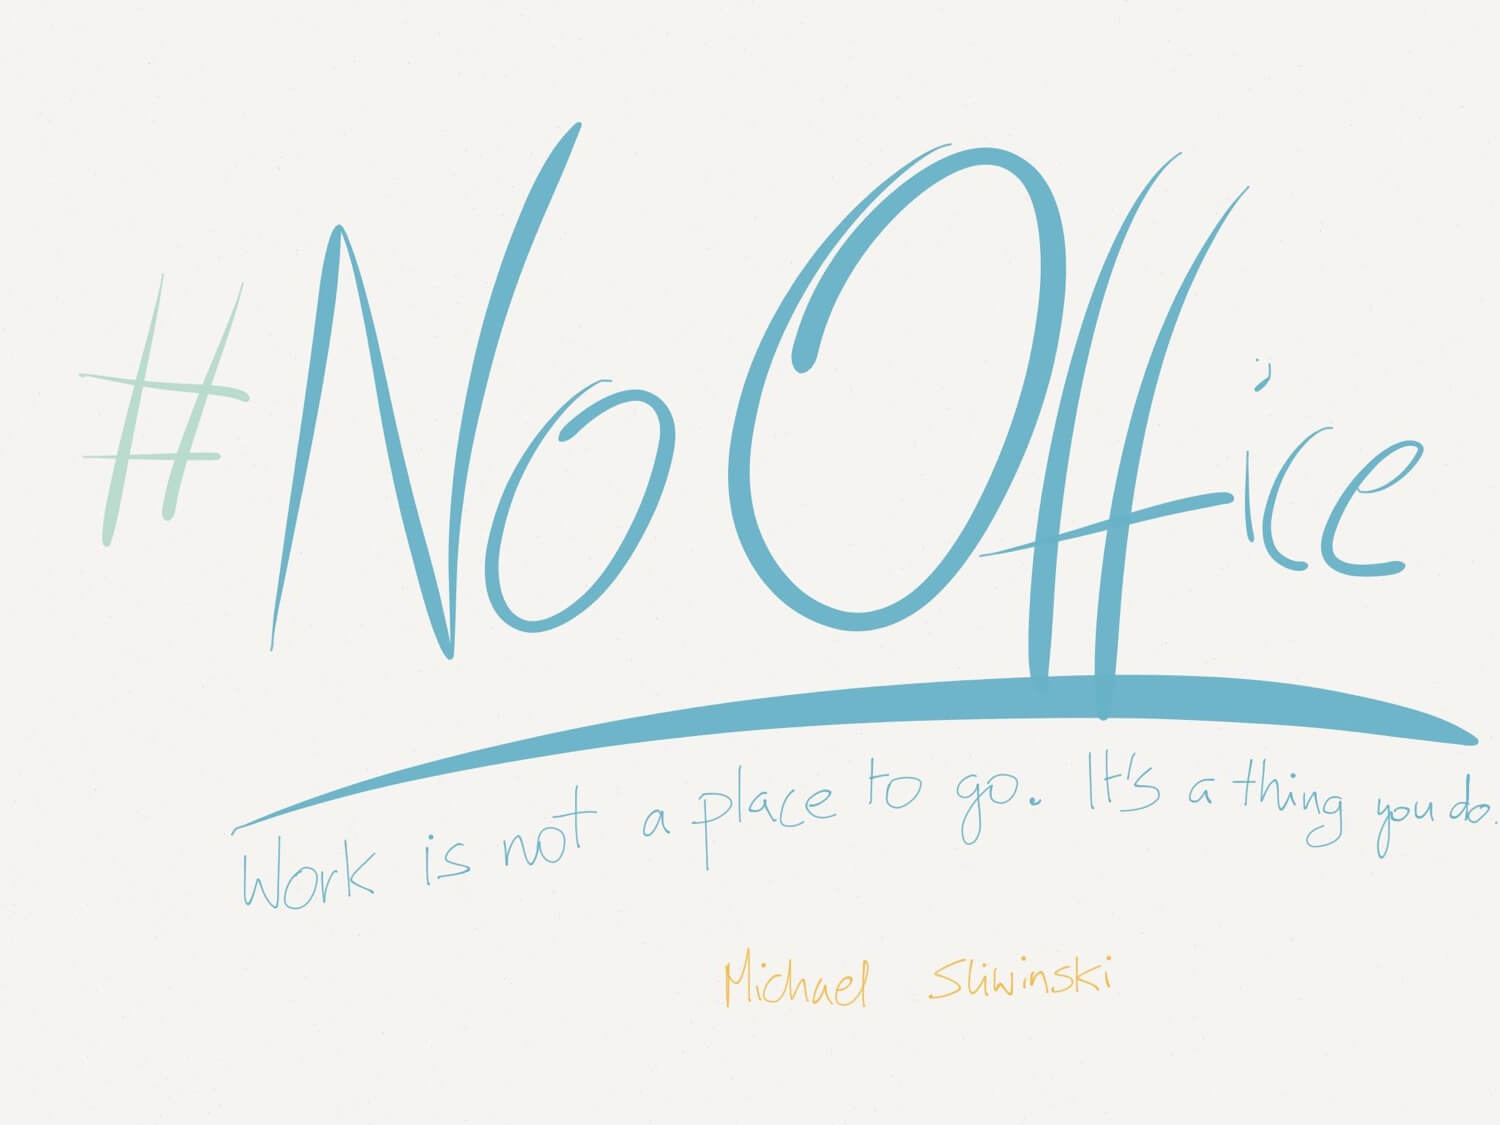 I’m writing my new book “#NoOffice” because work is not a place to go, it’s a thing you do